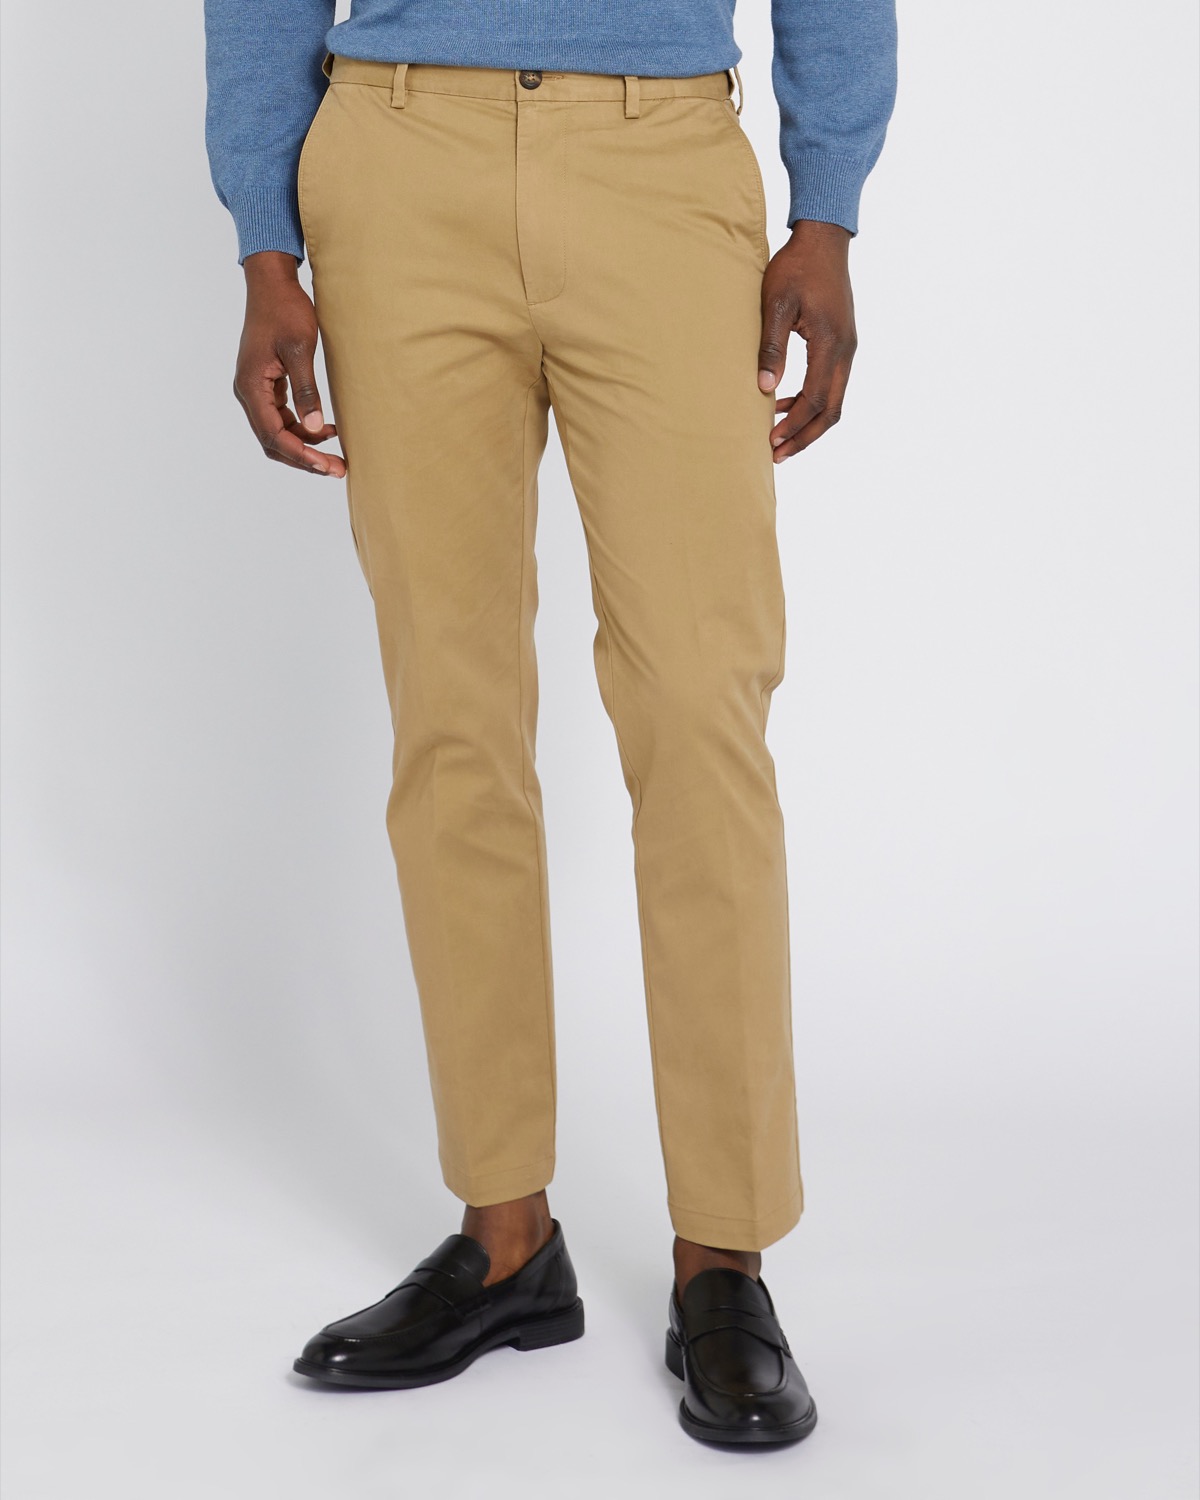 Dunnes Stores | Caramel Premium Stretch Chinos (Big & Tall Sizes Available)